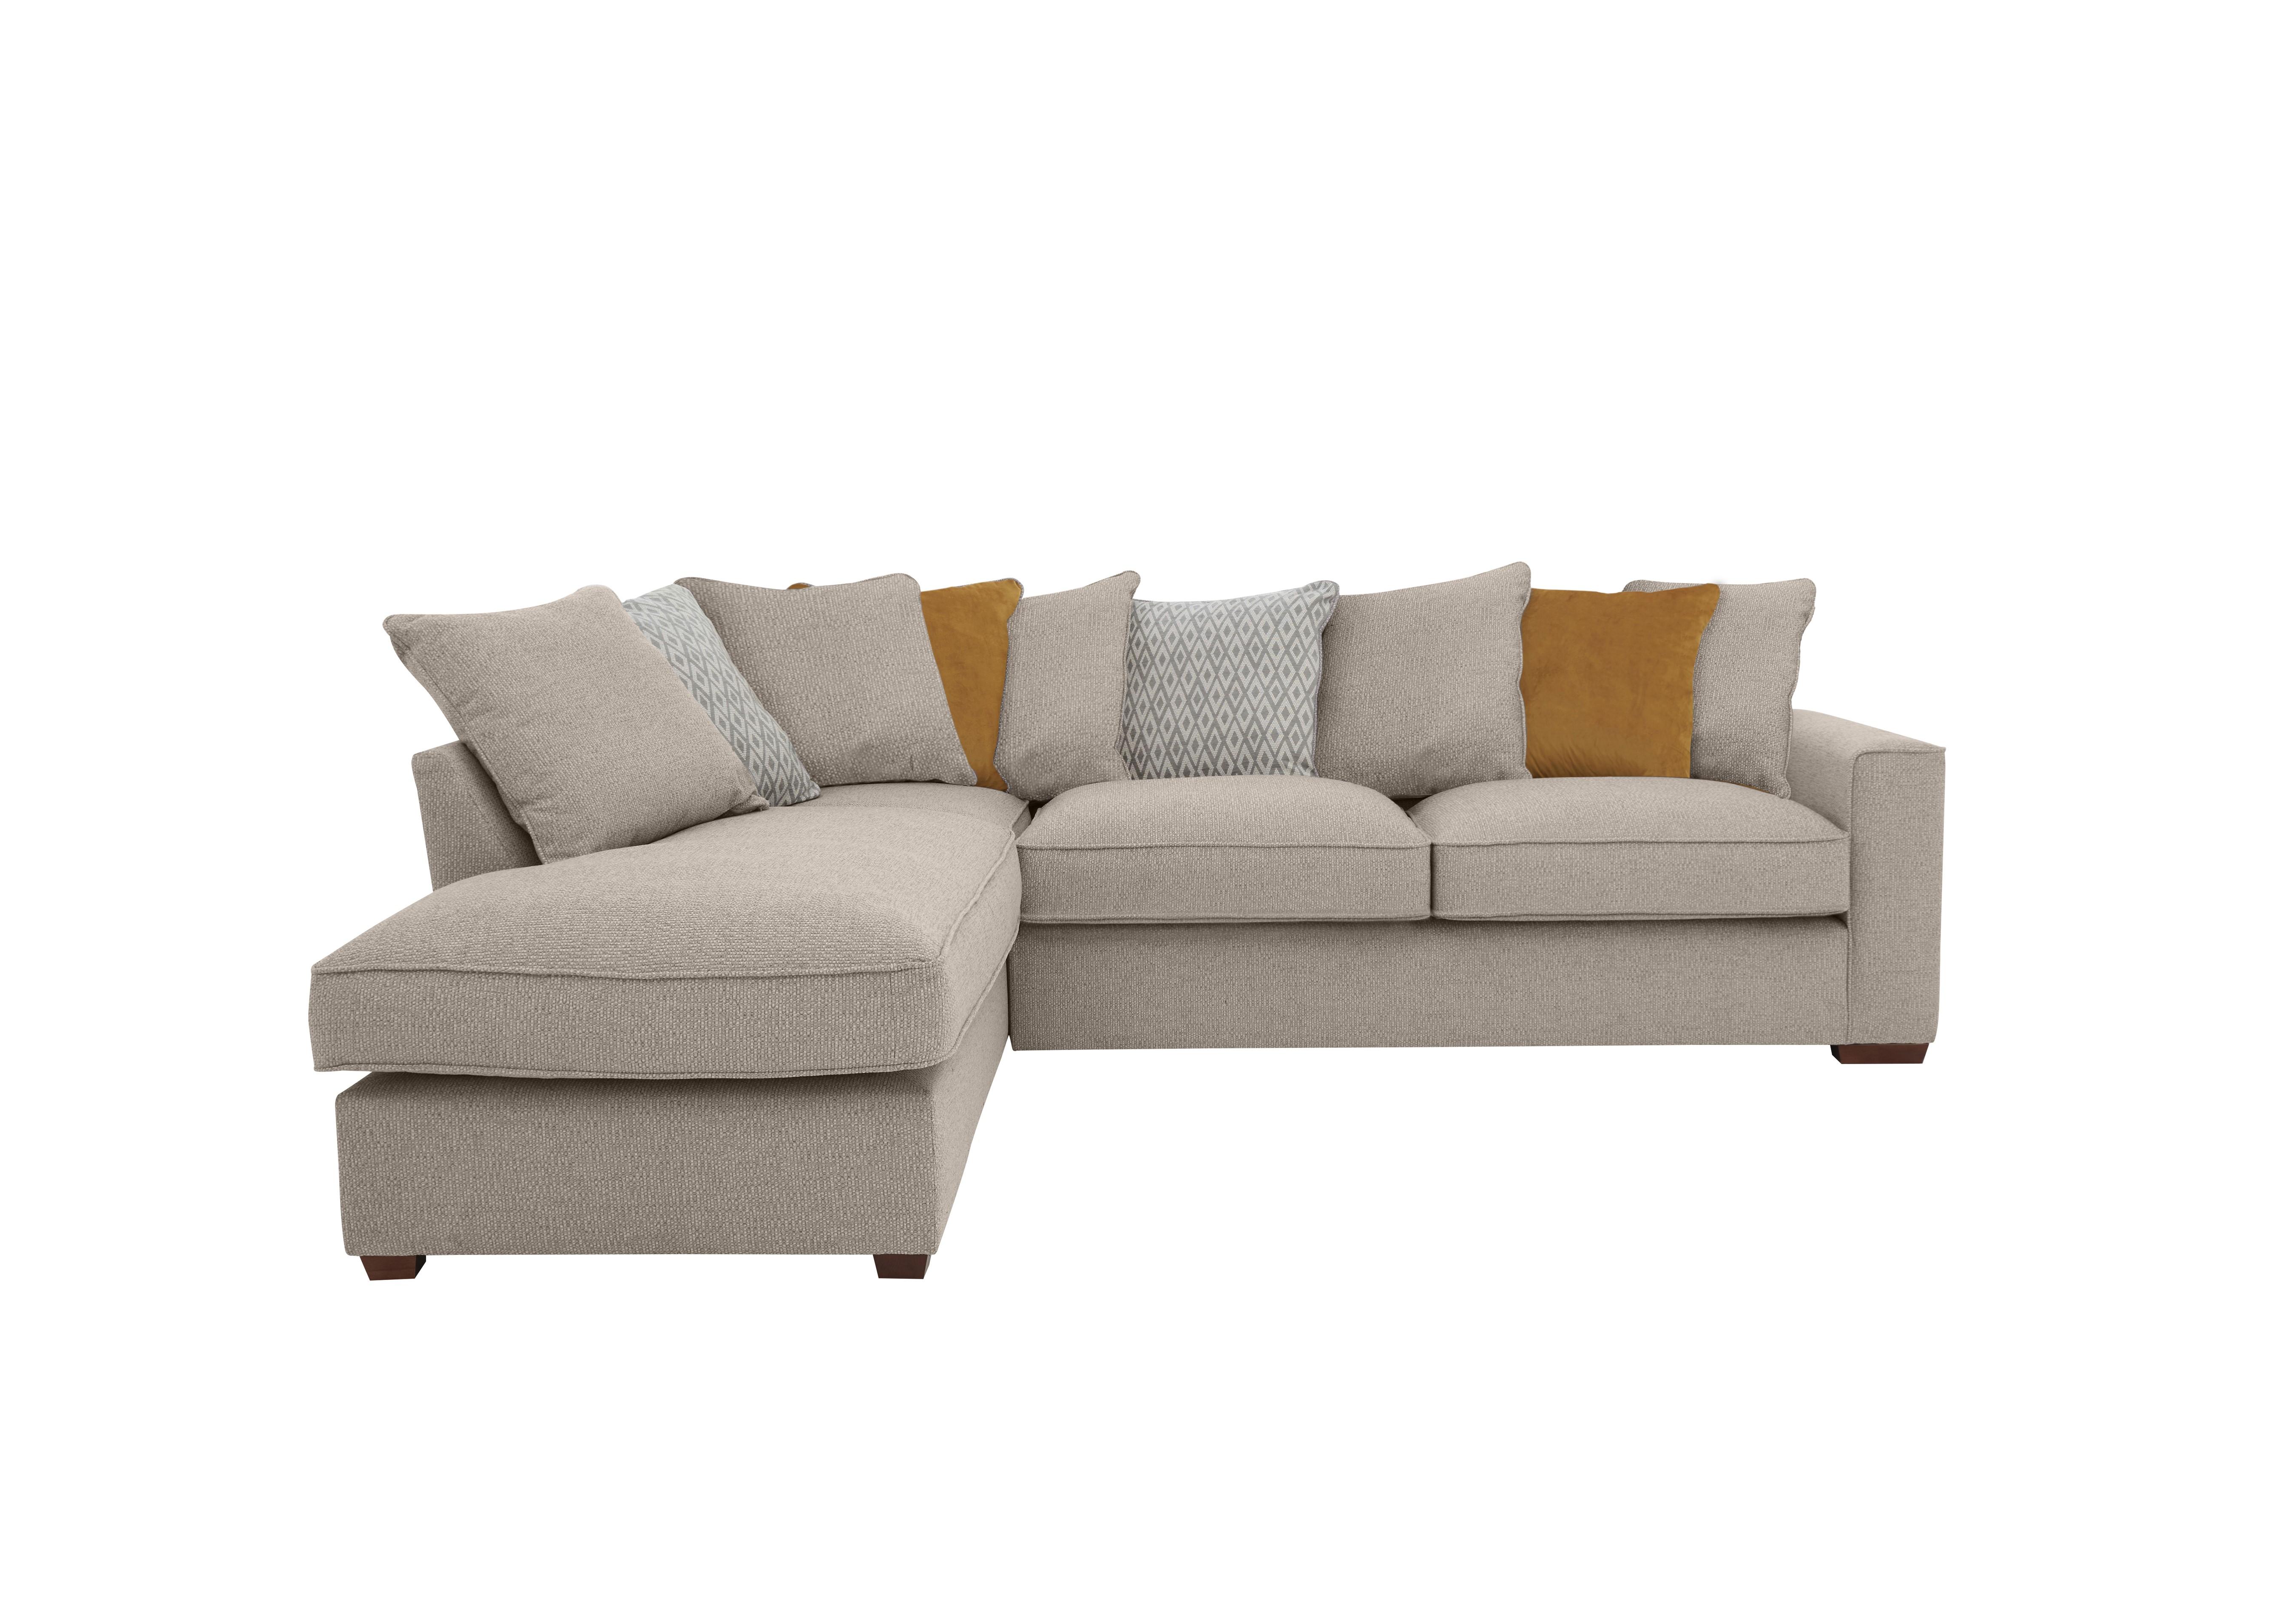 Cory Fabric Corner Chaise Scatter Back Sofa in Dallas Natural Mustard Pack on Furniture Village